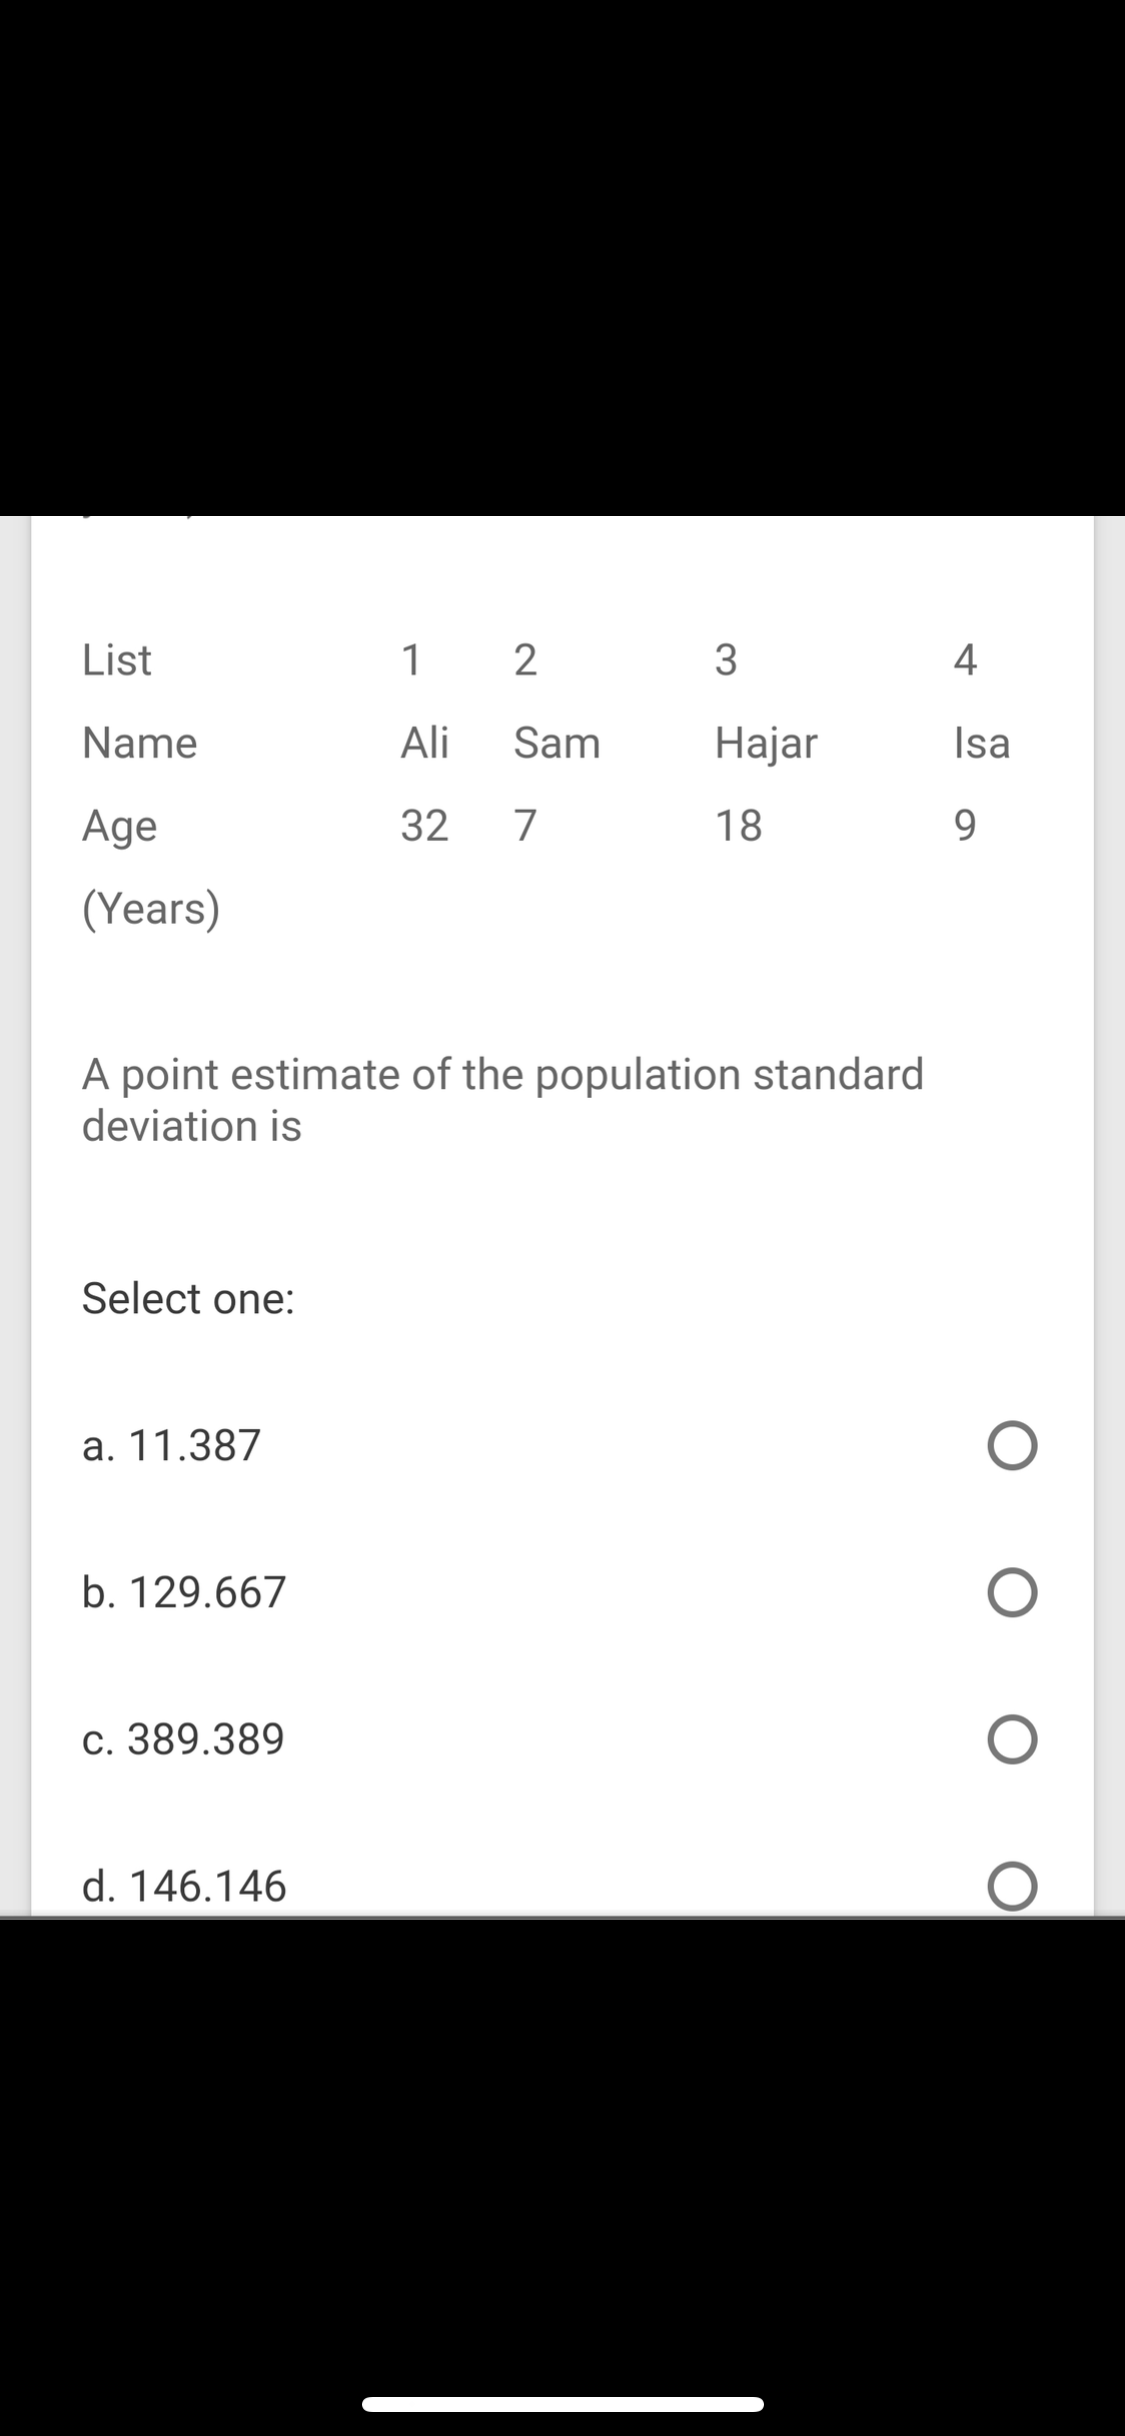 List
1
2
4
Name
Ali
Sam
Hаjar
Isa
Age
32
7
18
9.
(Years)
A point estimate of the population standard
deviation is
